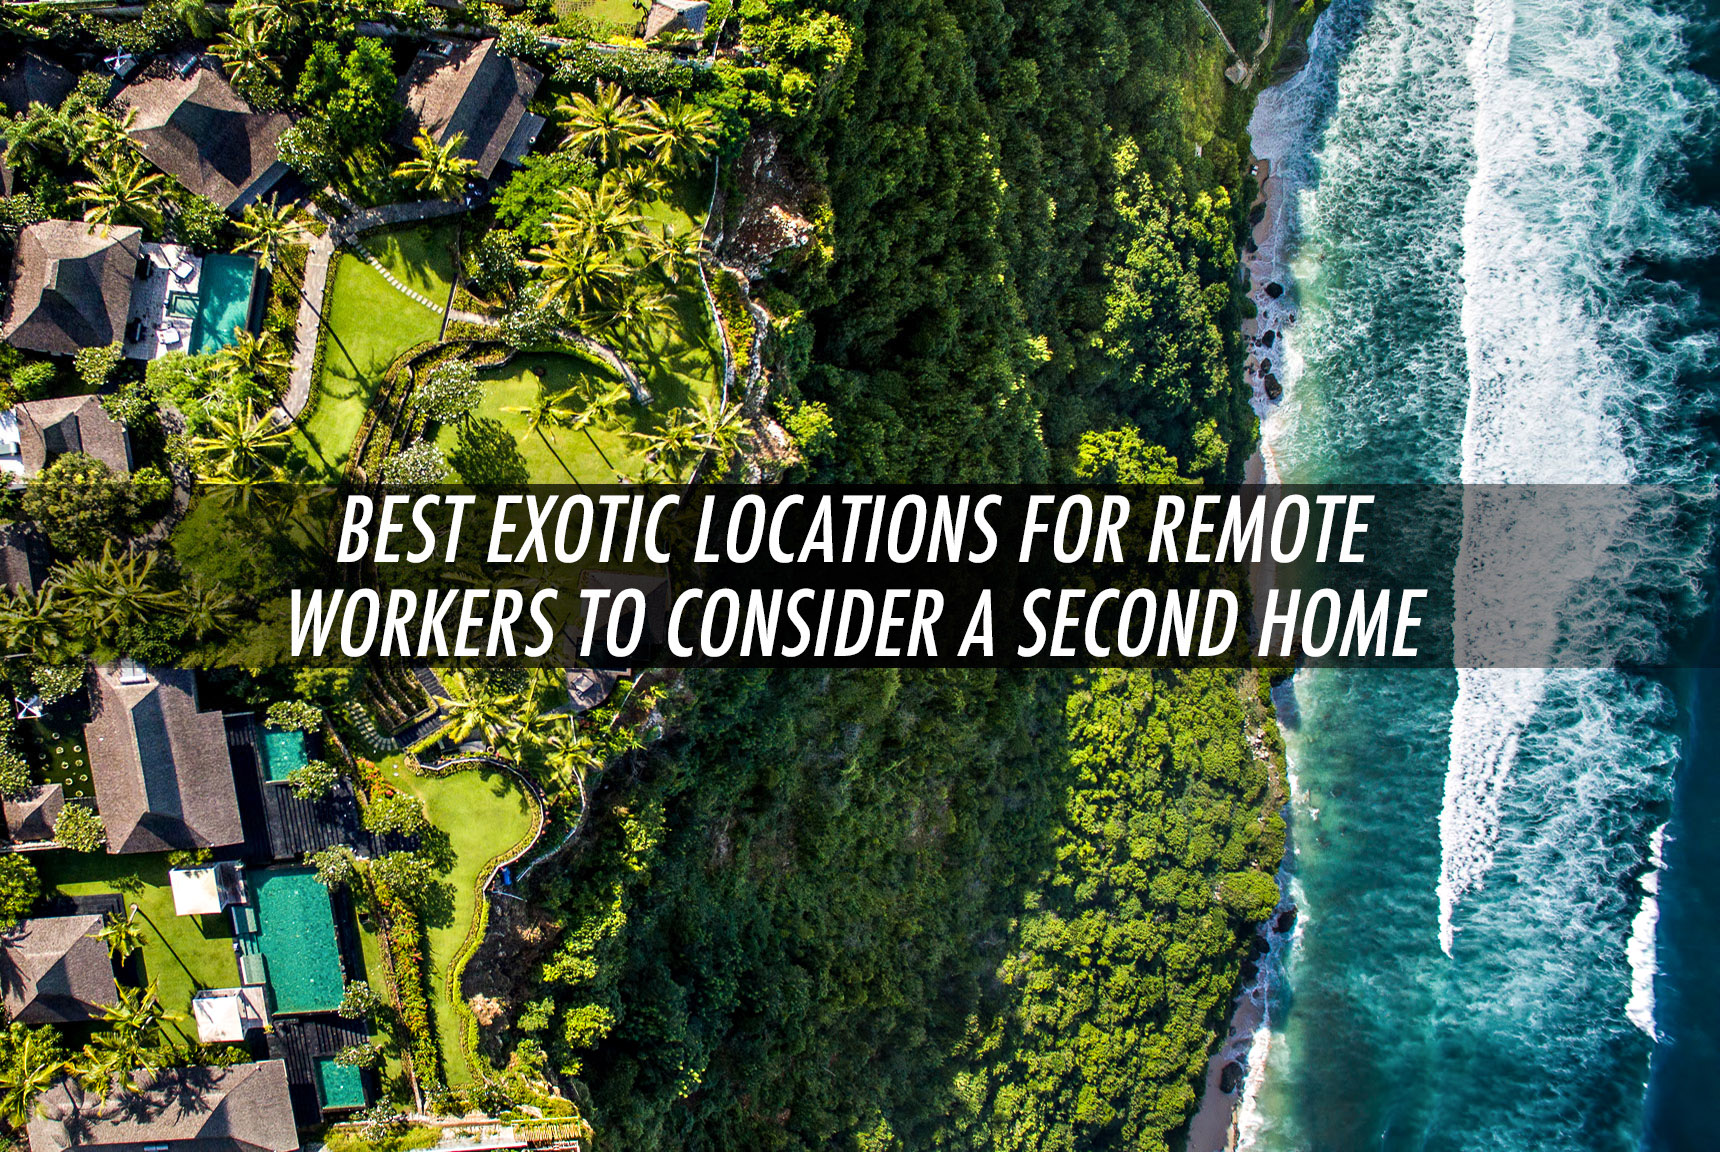 Best Exotic Locations for Remote Workers to Consider a Second Home